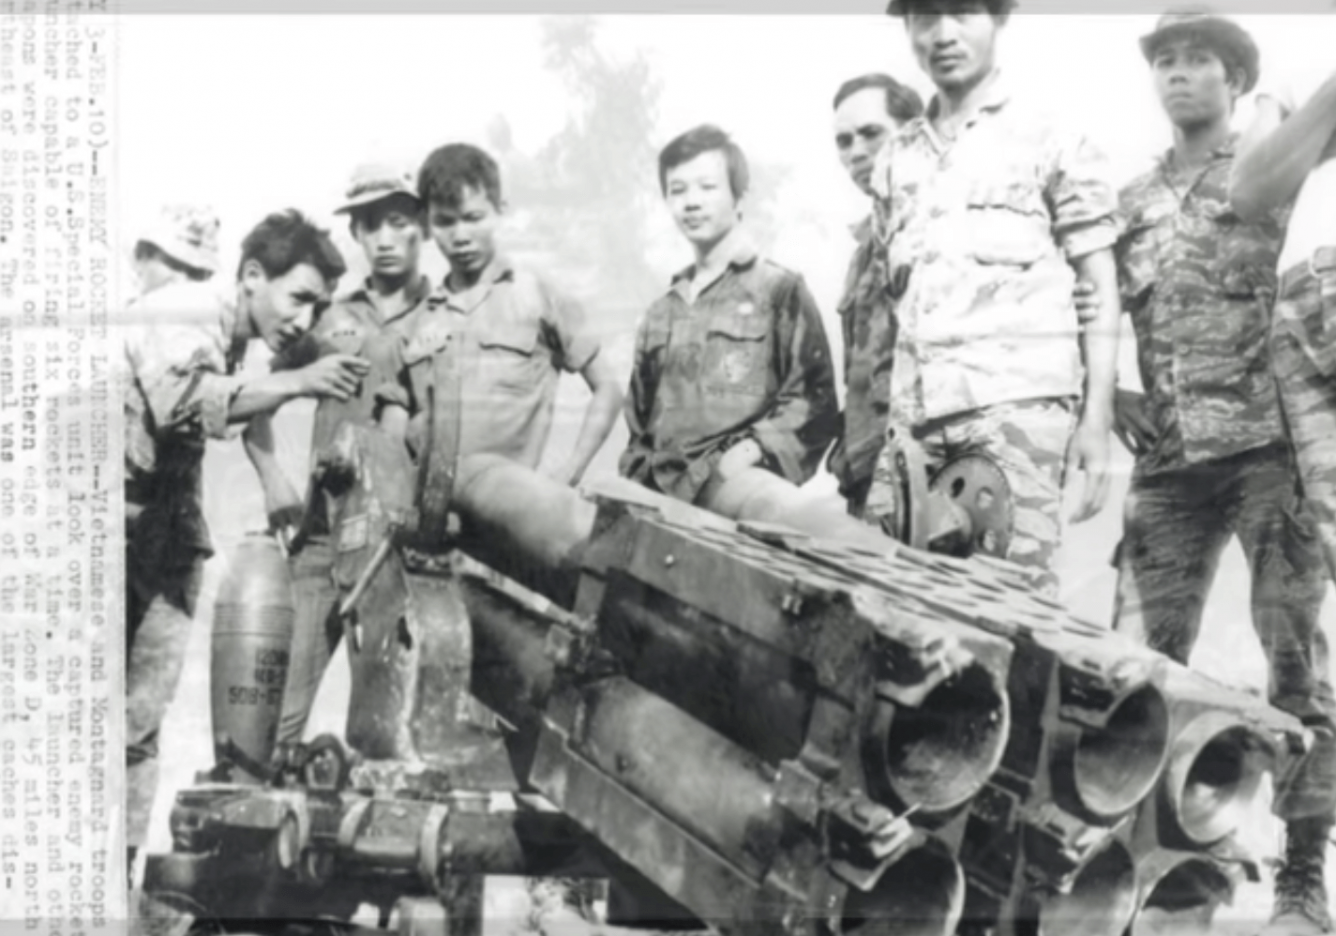 A group of Asian soldiers standing around and looking at a large piece of weaponry.